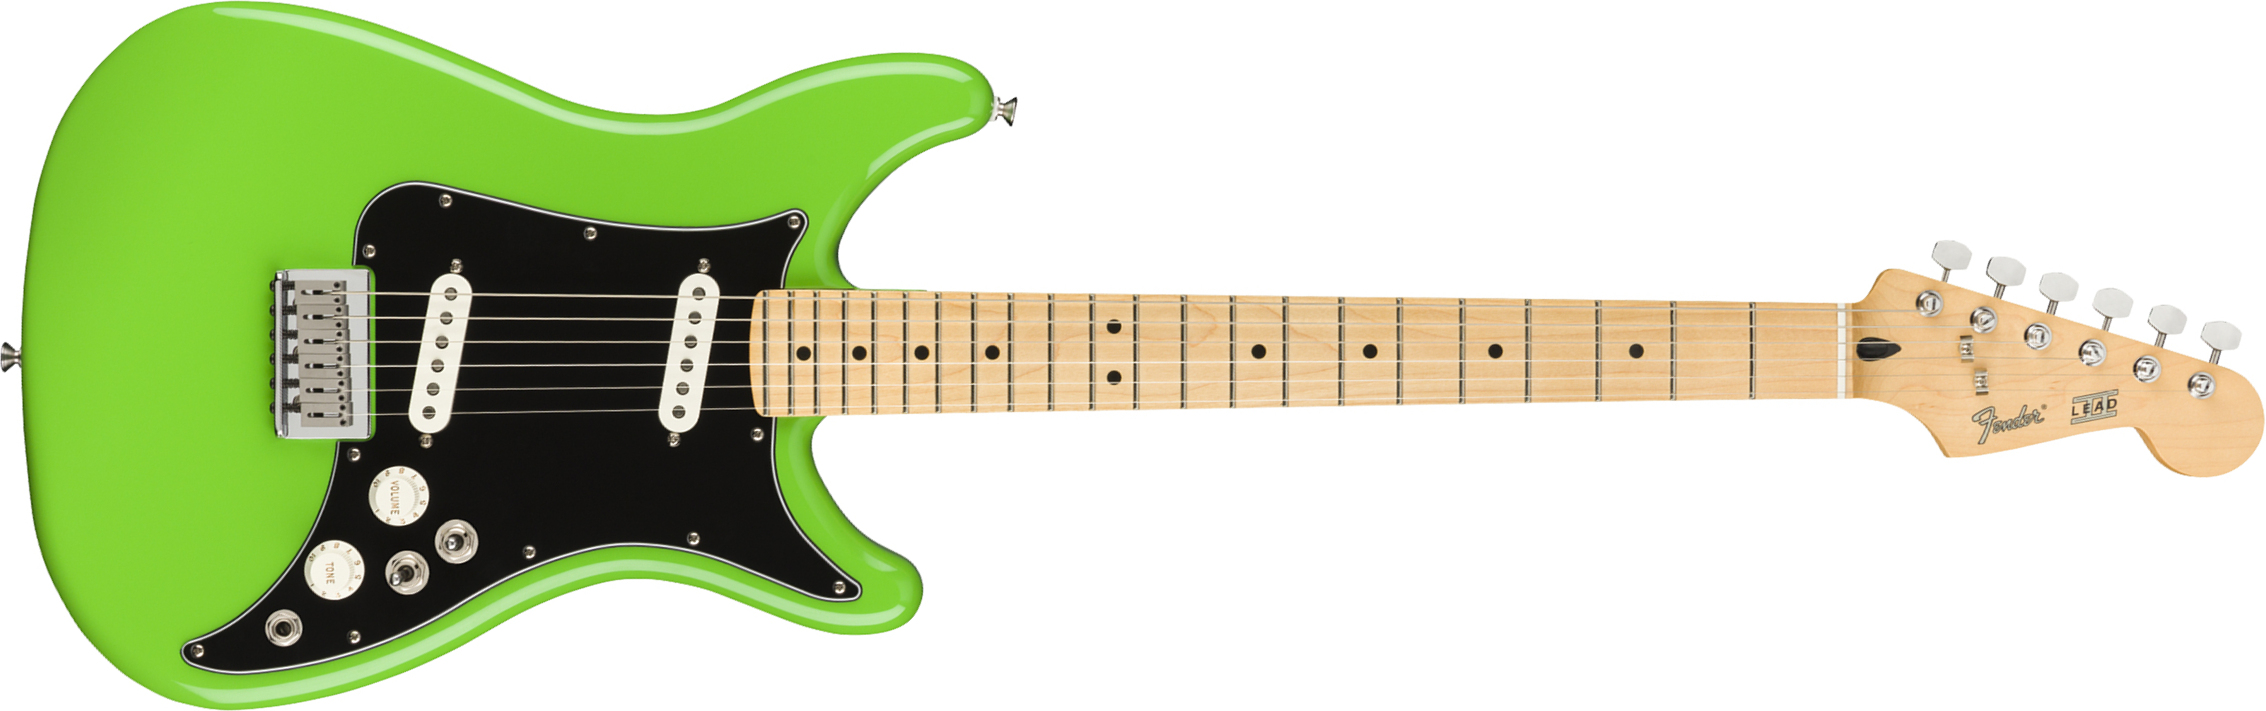 Fender Lead Ii Player Mex Ss Ht Mn - Neon Green - Str shape electric guitar - Main picture